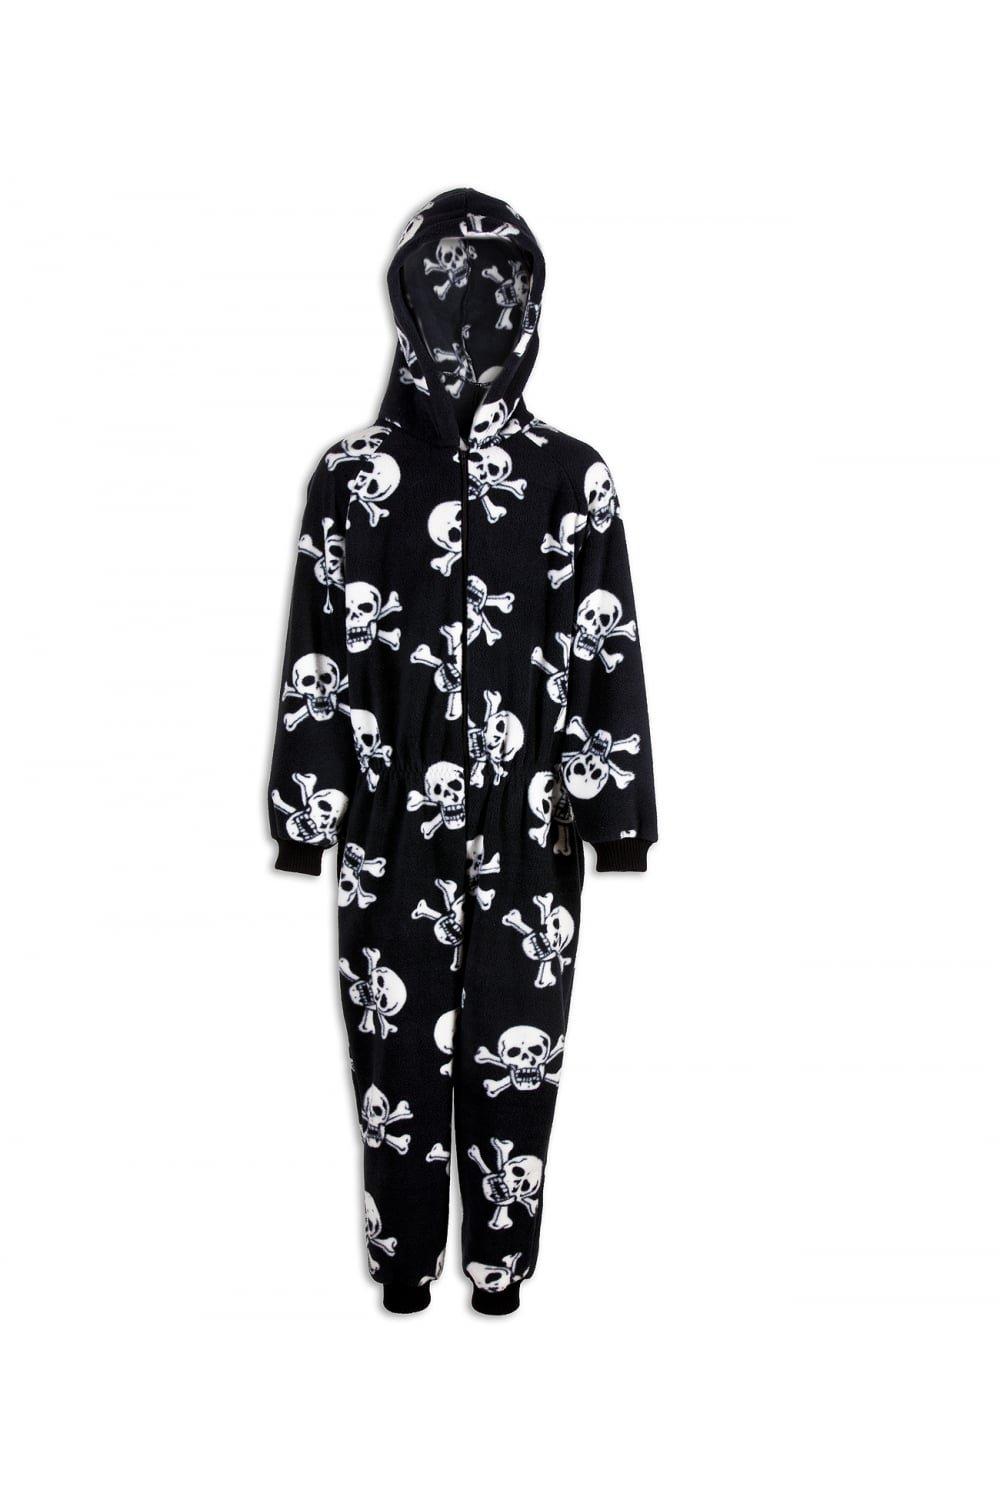 Supersoft Skull Print Hooded All In One Onesie